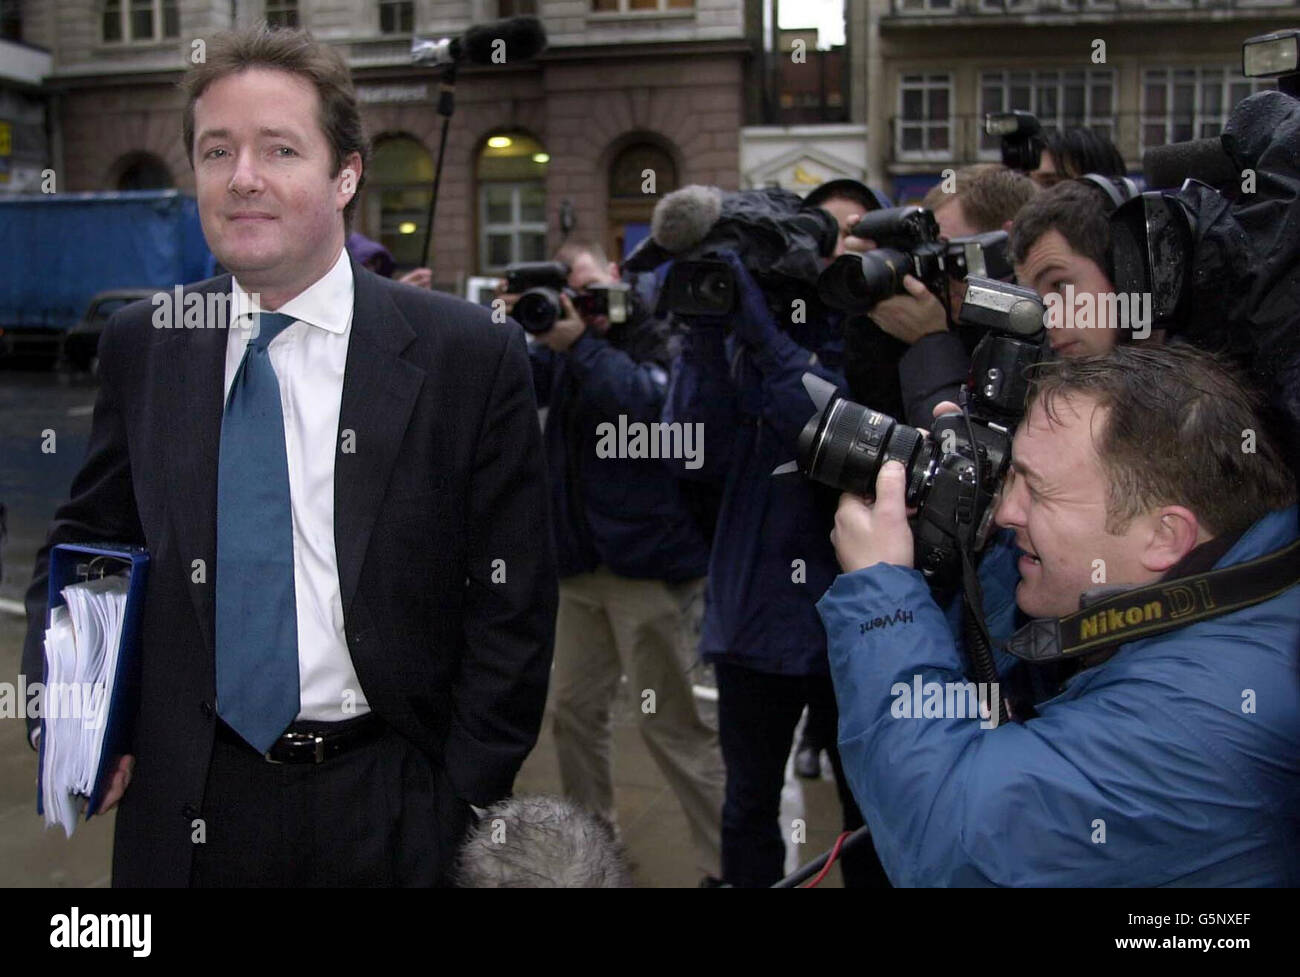 Piers Morgan, editor of The Mirror, arriving at the High Court in London, where supermodel Naomi Campbell, 31, is suing the newspaper for breach of confidence and/or unlawful invasion of privacy after it published a photograph of her leaving a Narcotics Anonymous meeting a year ago. She is expected to give evidence. Stock Photo